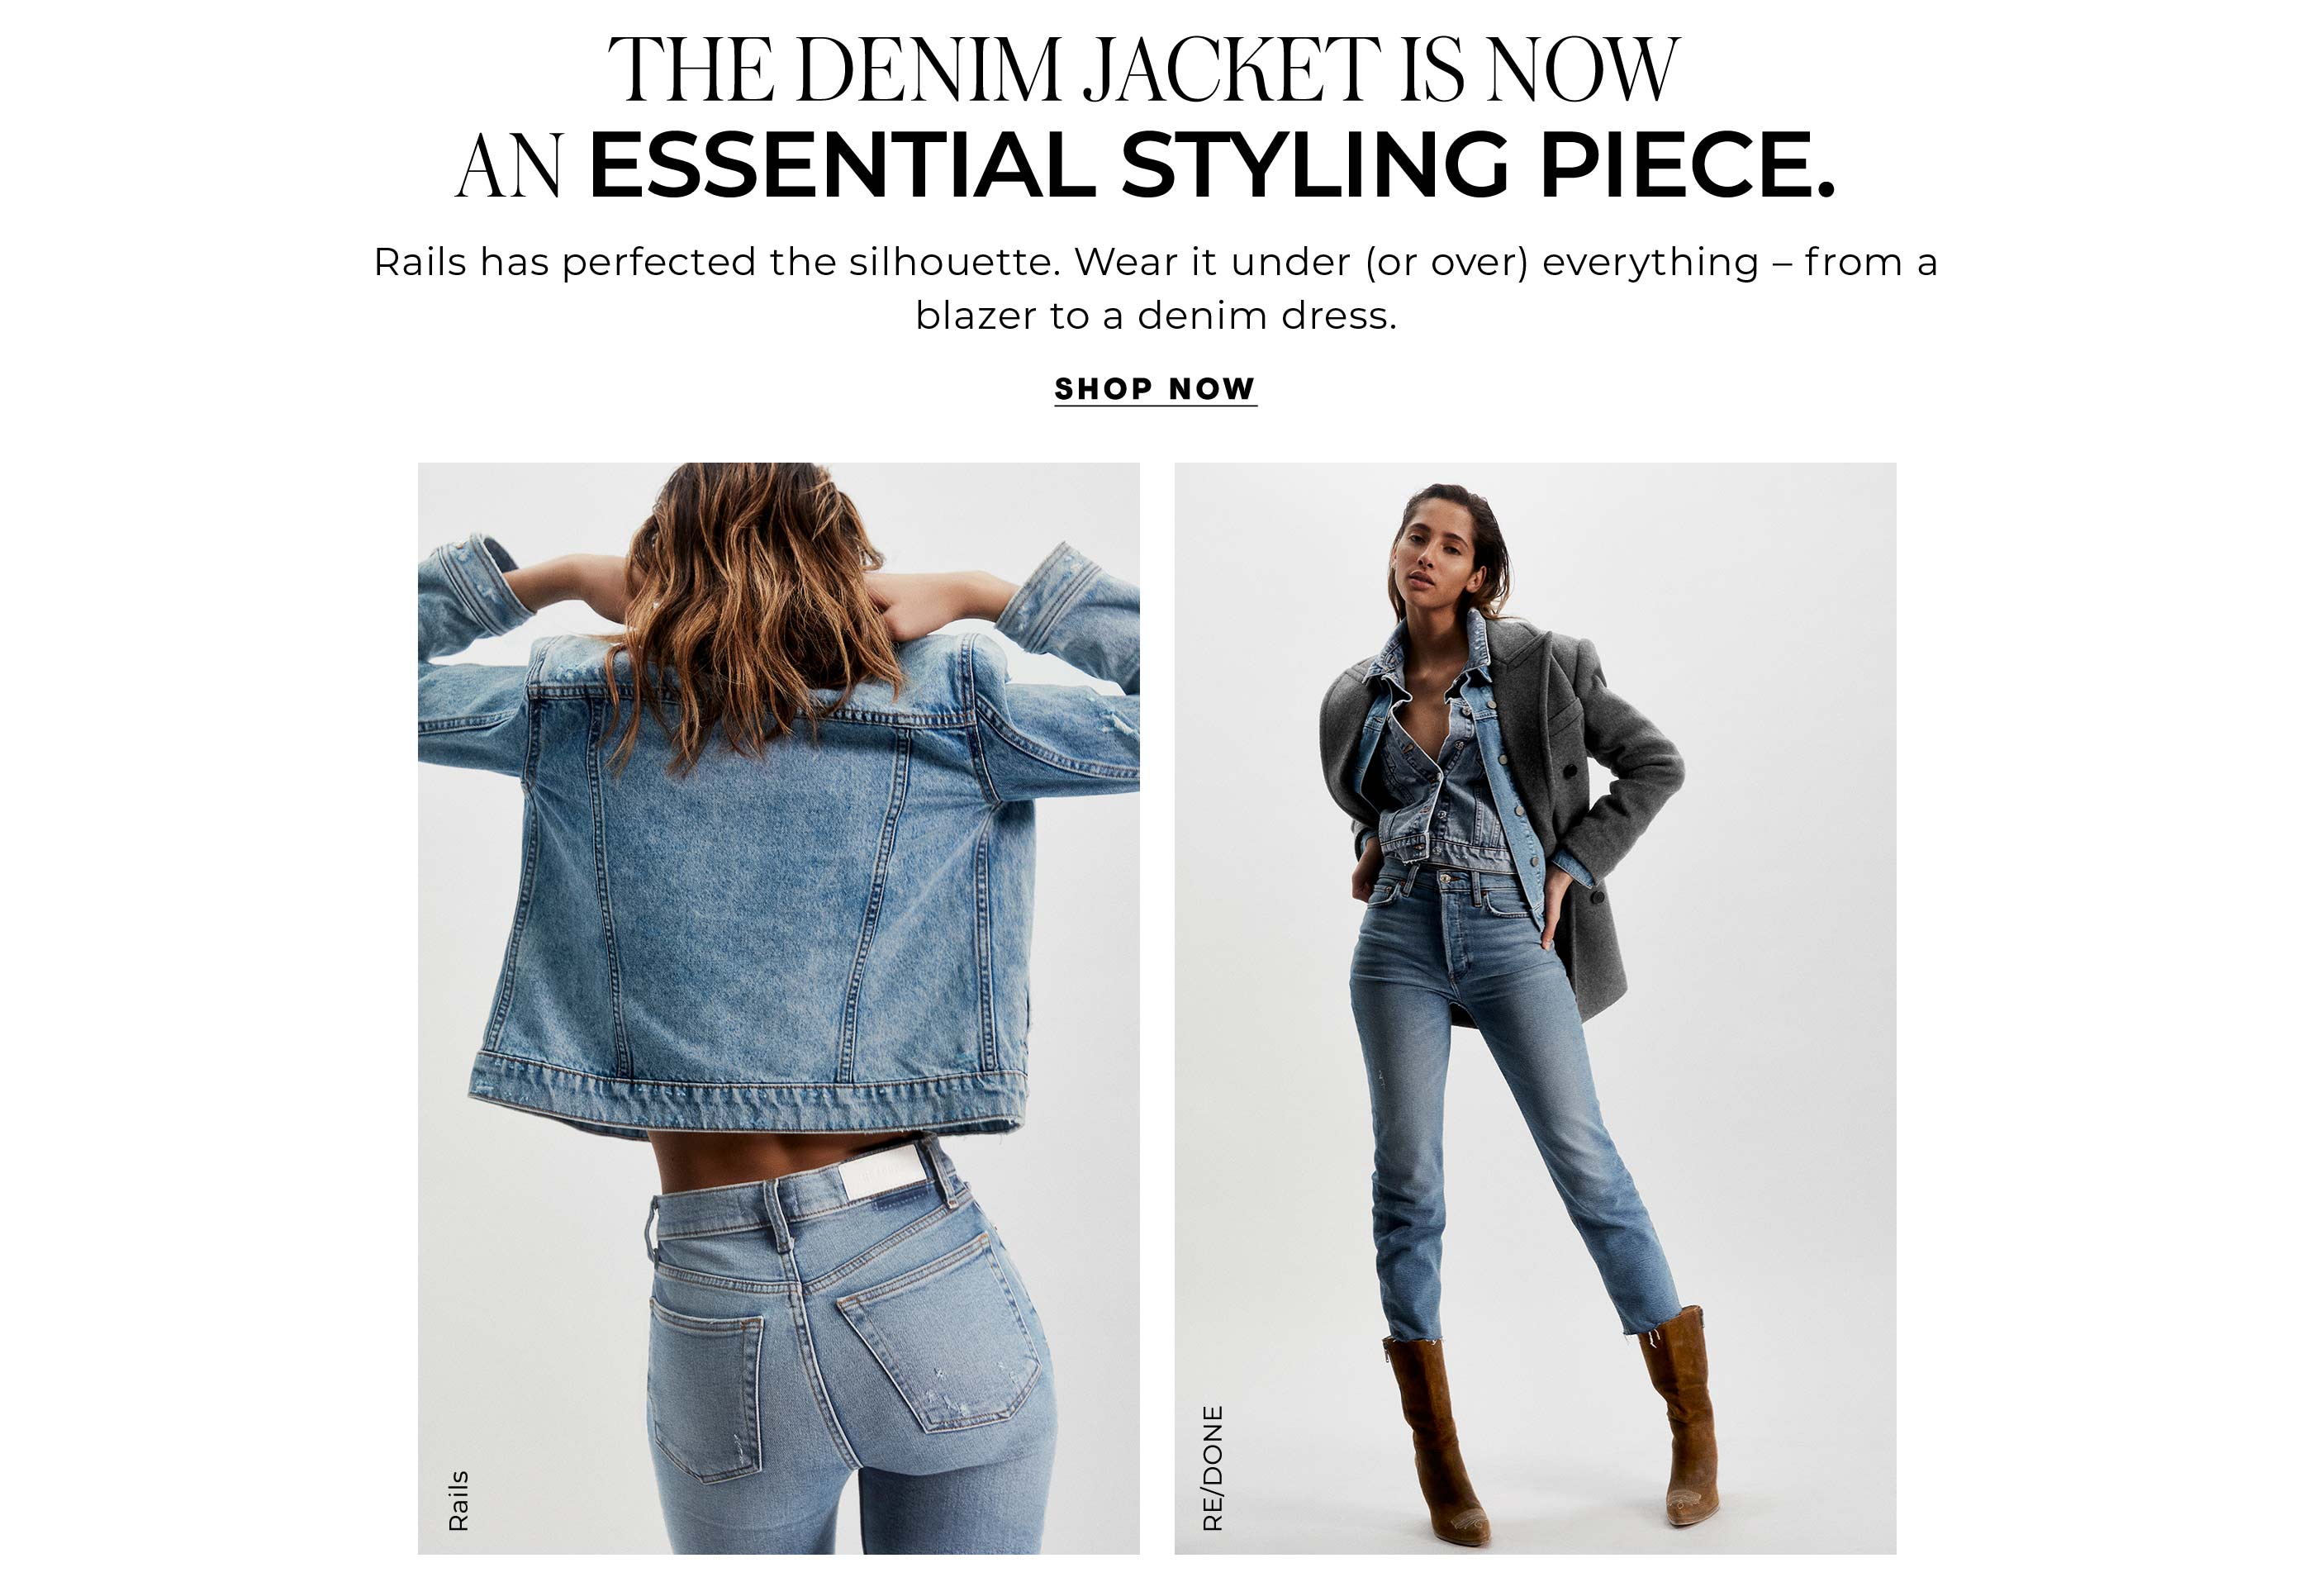 "The Denim Jacket Is Now An Essential Styling Piece. And this season, Rails has perfected the silhouette. Wear it under (or over) everything – from a blazer to a denim dress."